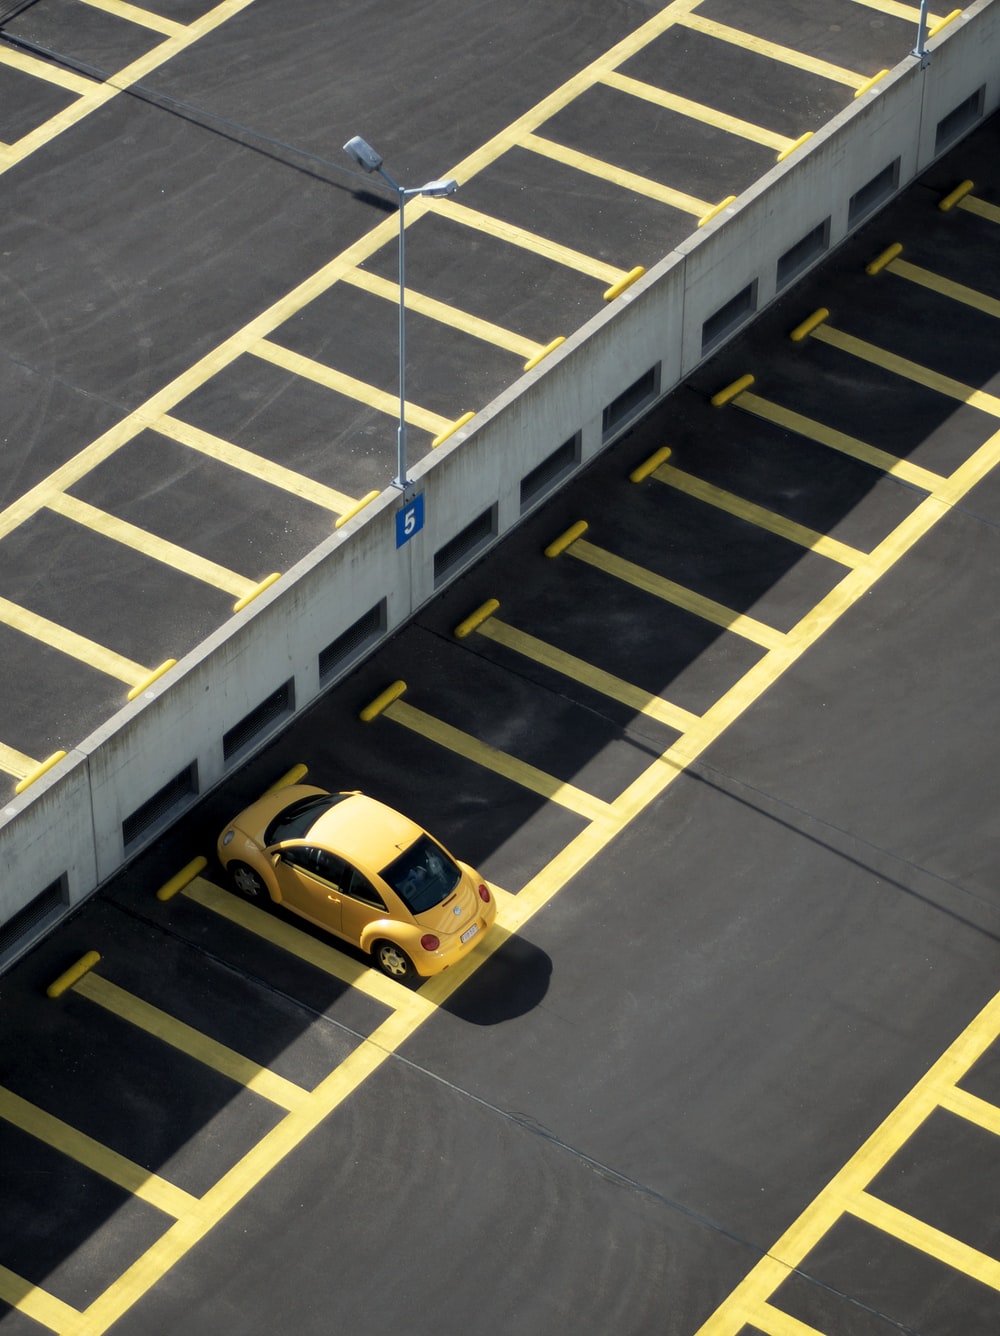 Parking Lot Picture [HQ]. Download Free Image